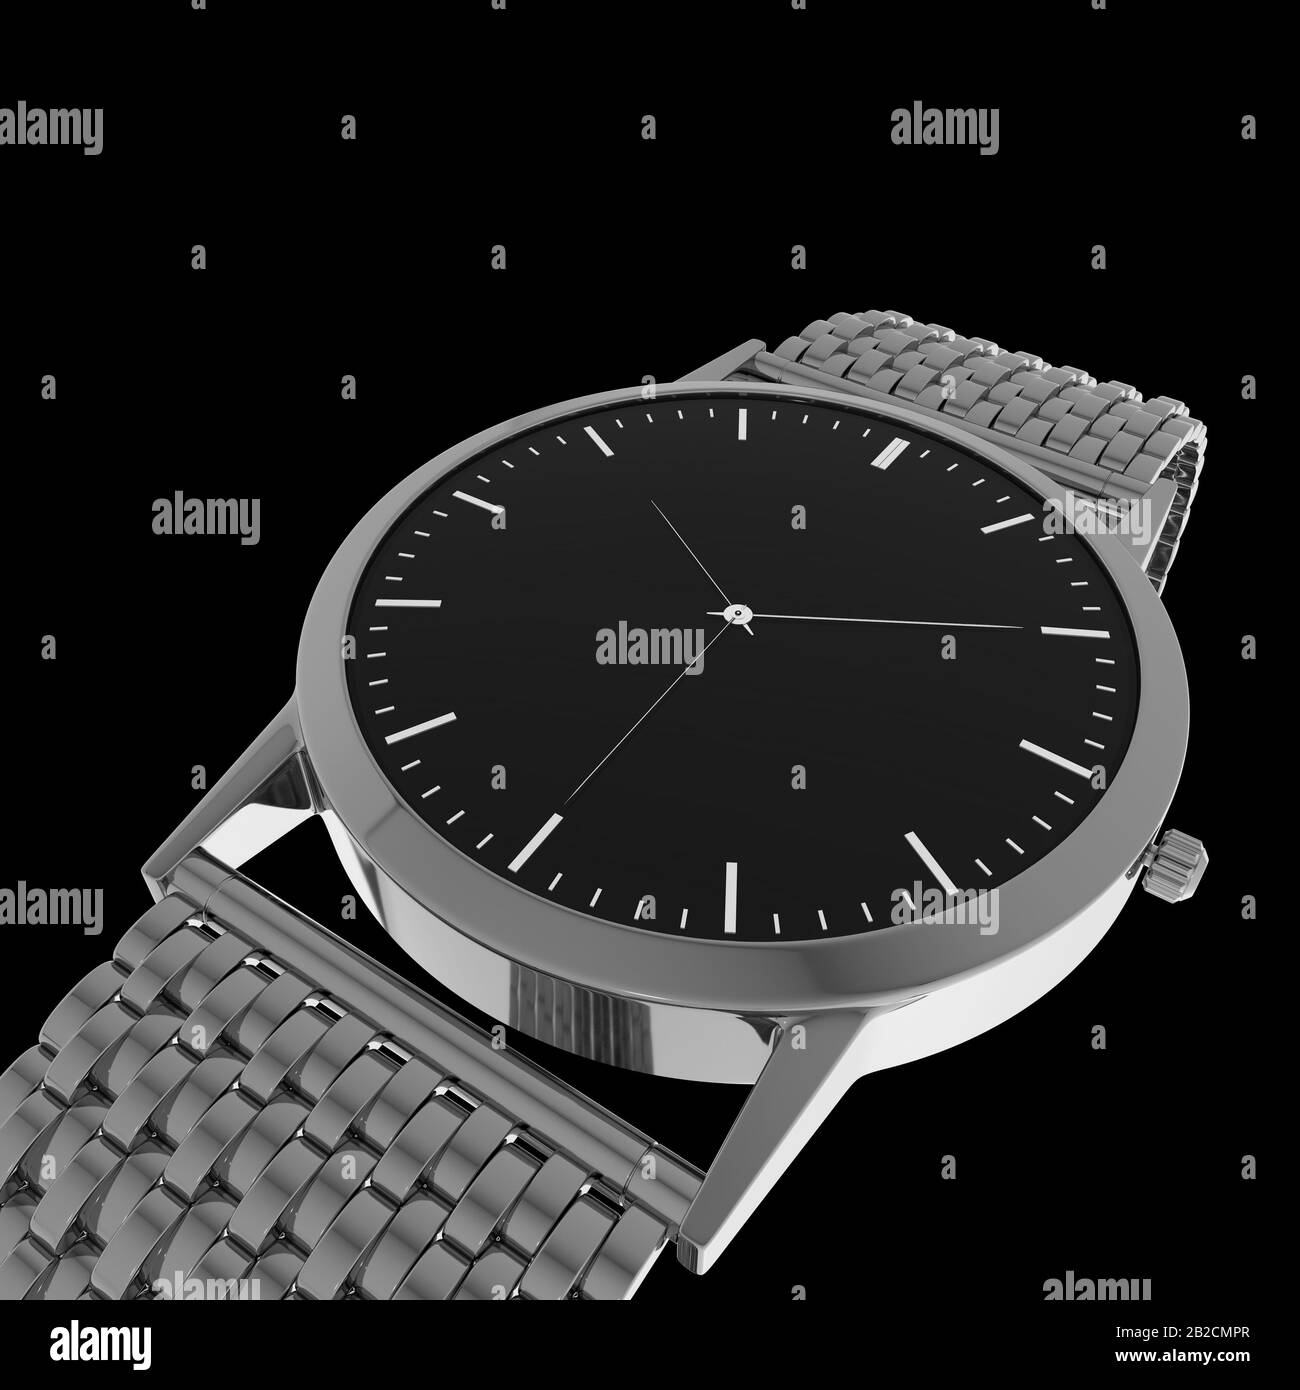 Full metal watch 3D Render showing crown and time pointing hands Stock Photo